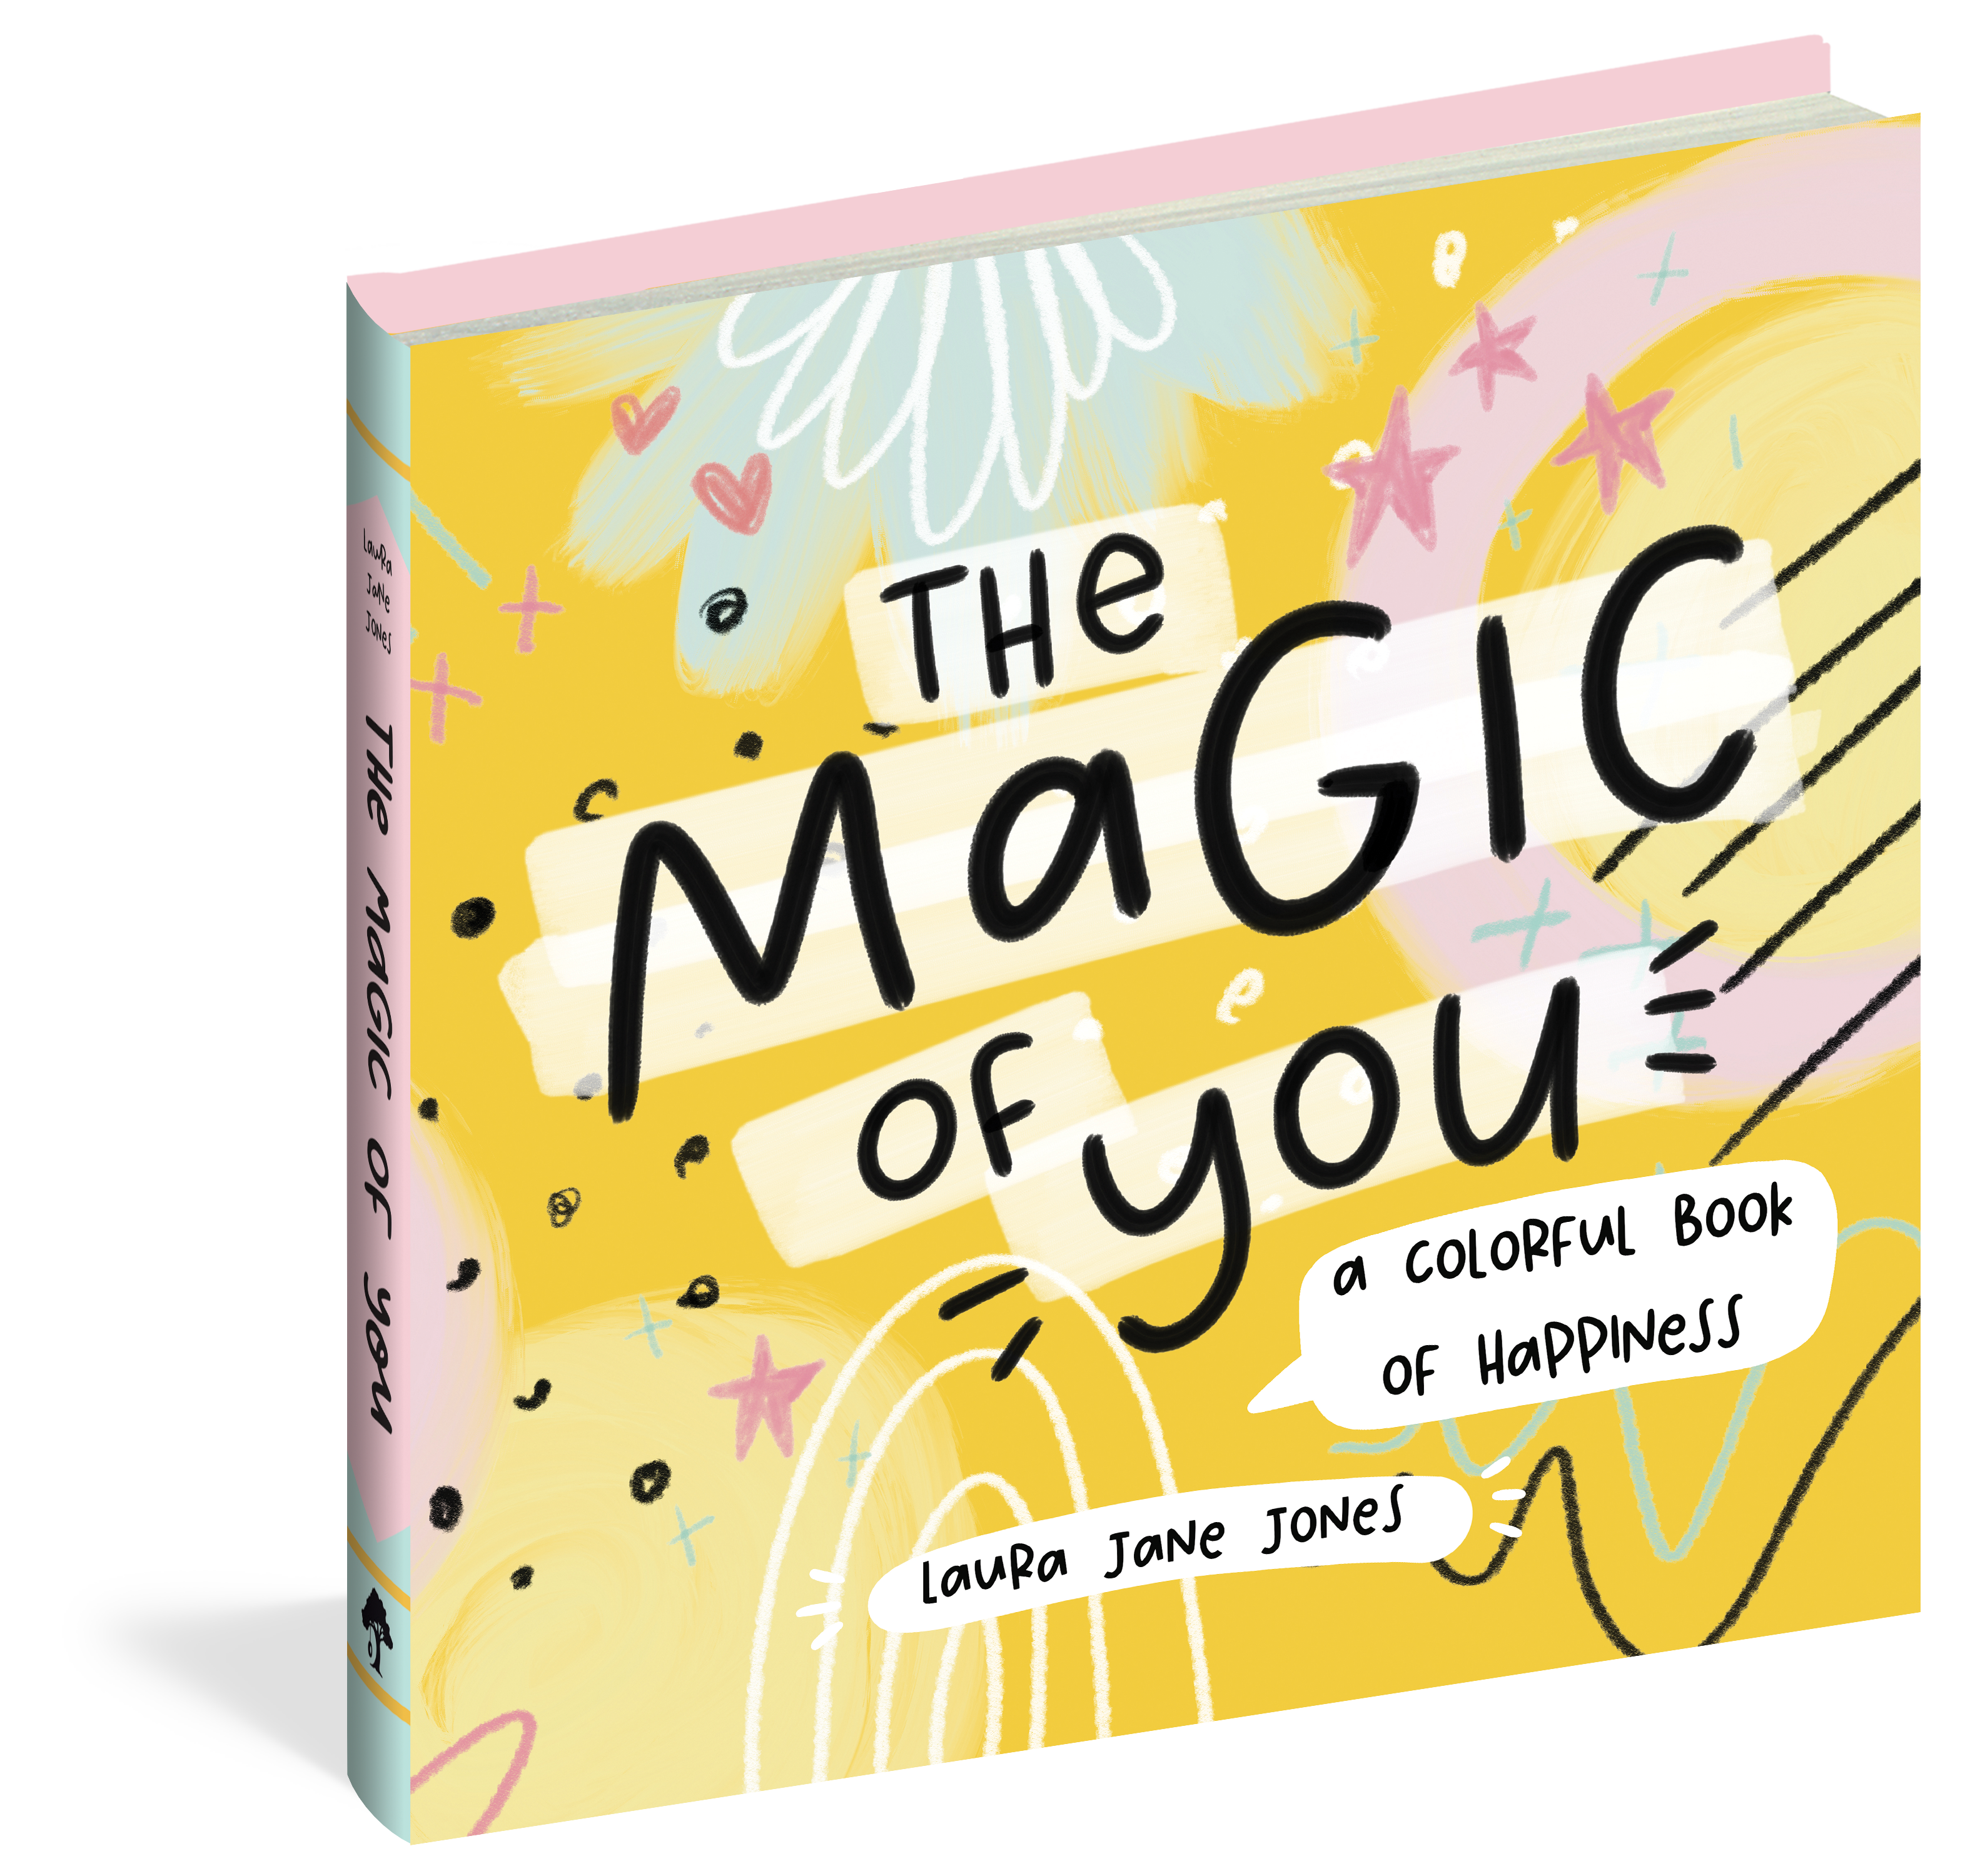 The cover of the book The Magic of You.